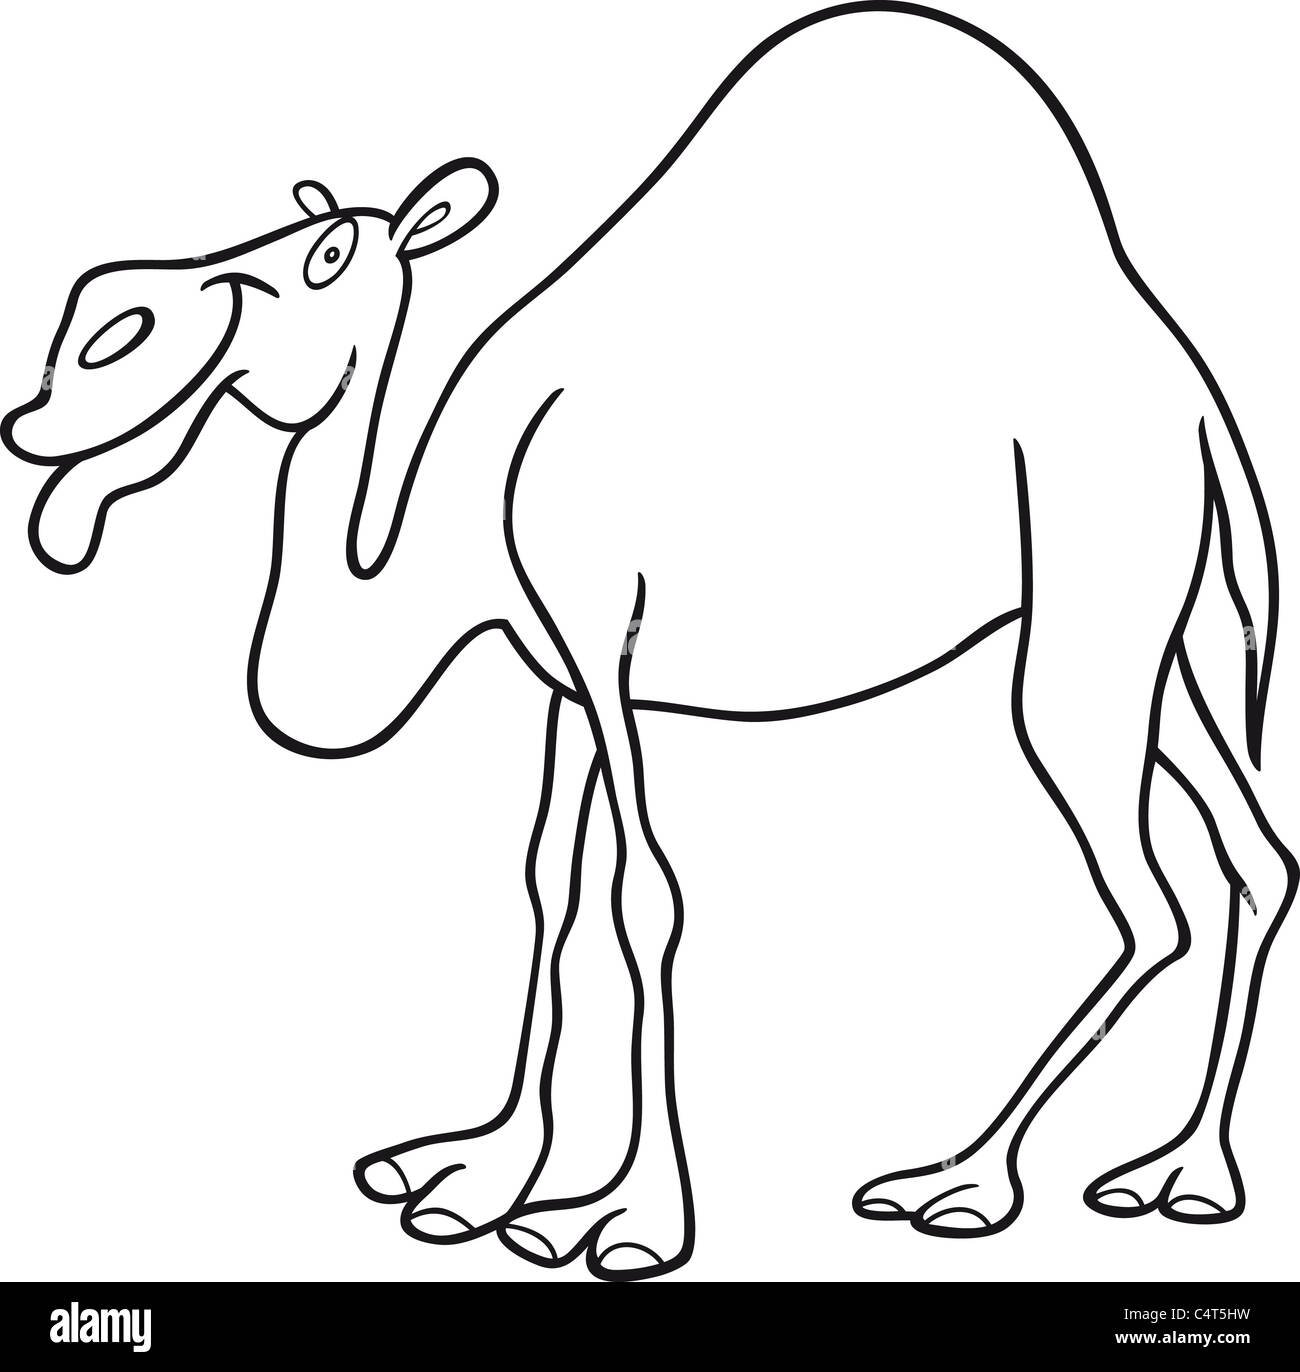 cartoon illustration of dromedary camel for coloring book Stock Photo